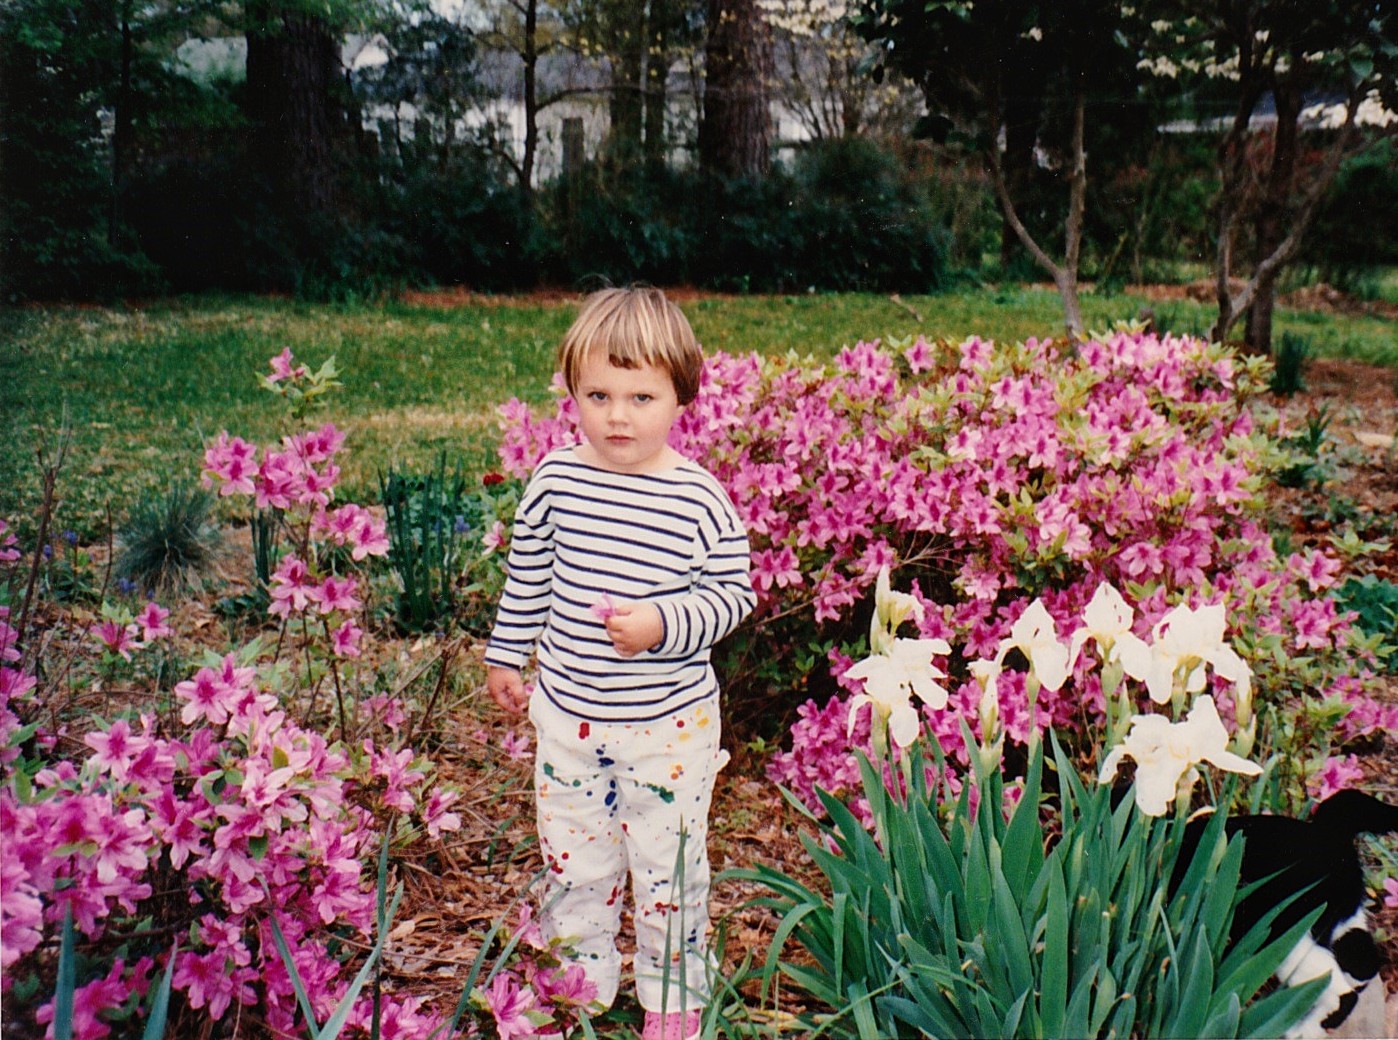 A young girl in a striped shirt standing among vivid pink azalea blooms with a cat just barely visible at her feet.